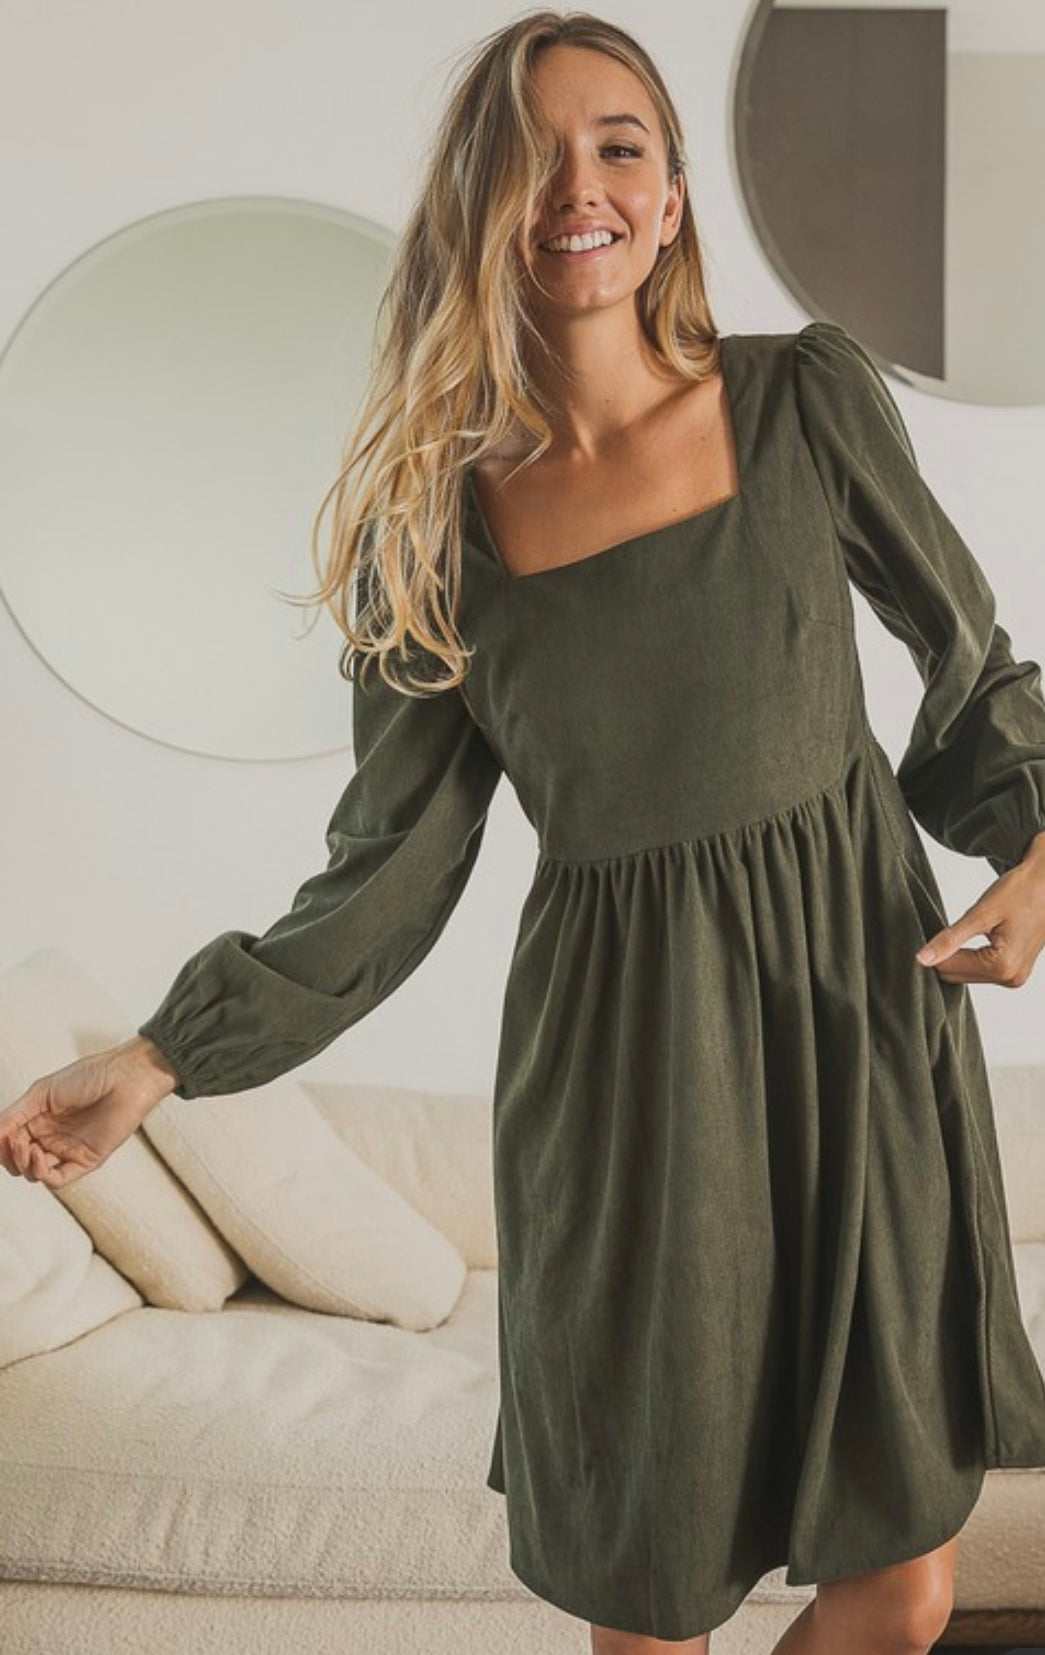 The Evelyn Corduroy Dress in 2 Colors